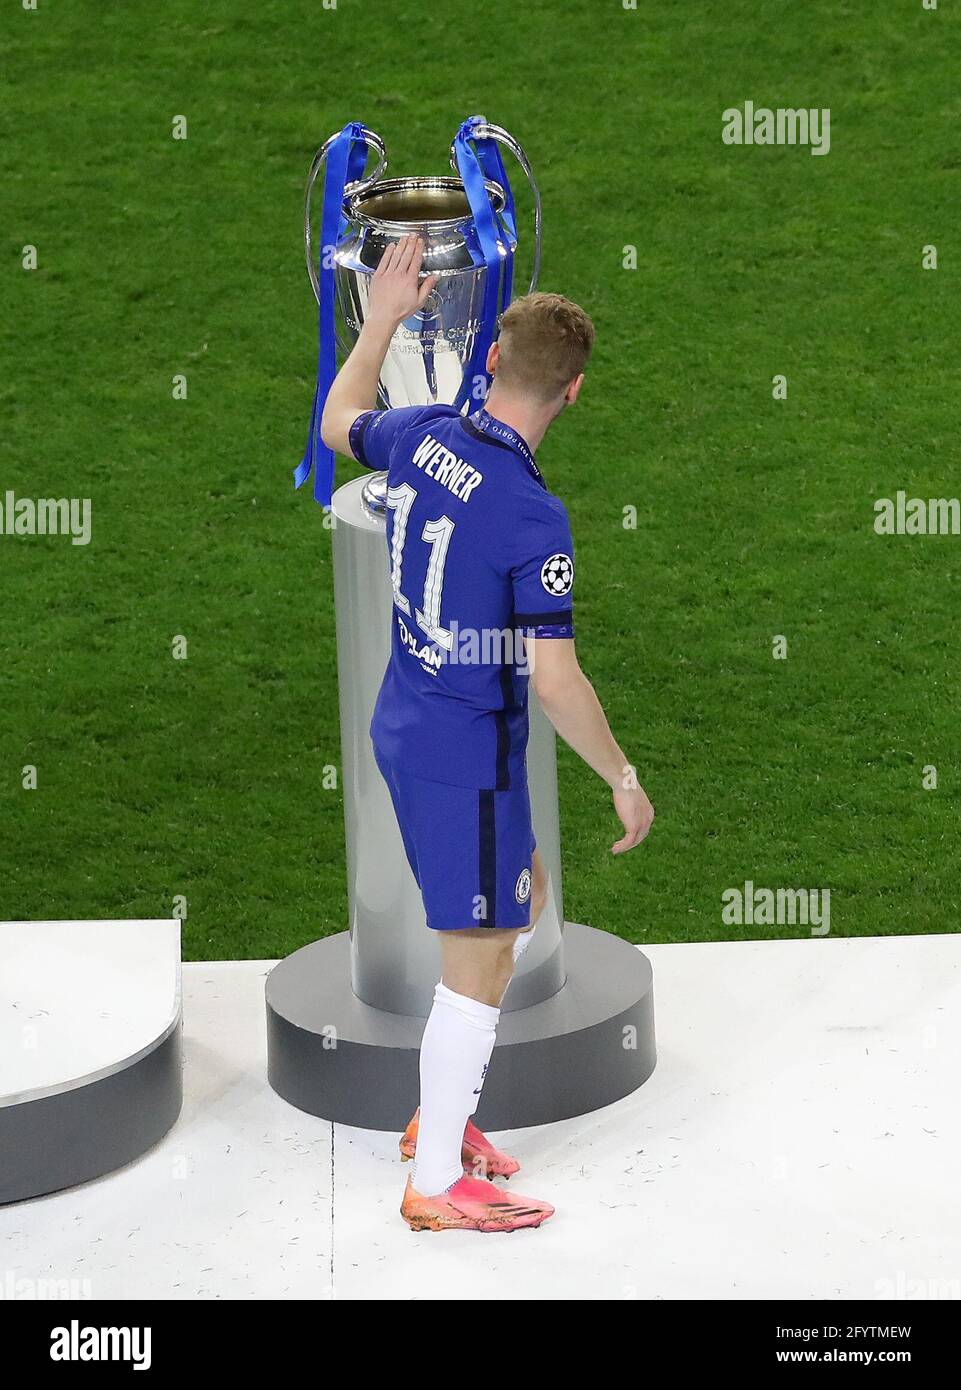 Porto, Portugal, 29th May 2021. Timo Werner of Chelsea with the trophy  during the UEFA Champions League match at the Estadio do Dragao, Porto.  Picture credit should read: David Klein / Sportimage